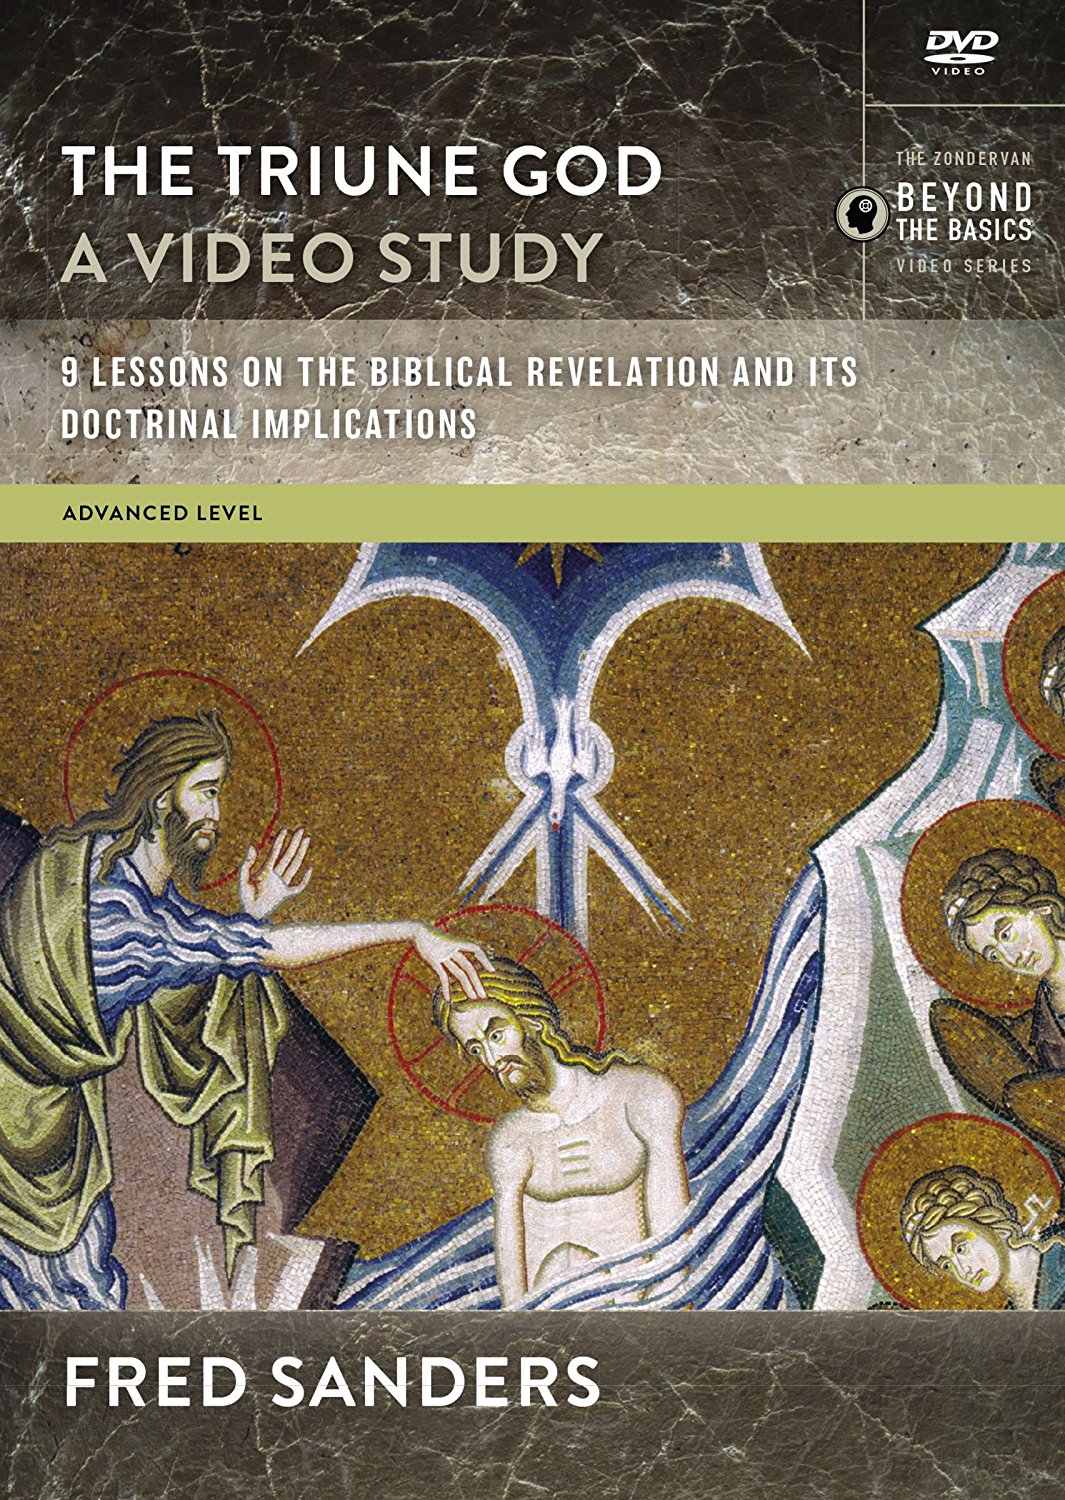 Recently Released: THE TRINUE GOD: A VIDEO STUDY: 9 LESSONS ON THE BIBLICAL REVELATION AND ITS DOCTRINAL IMPLICATIONS